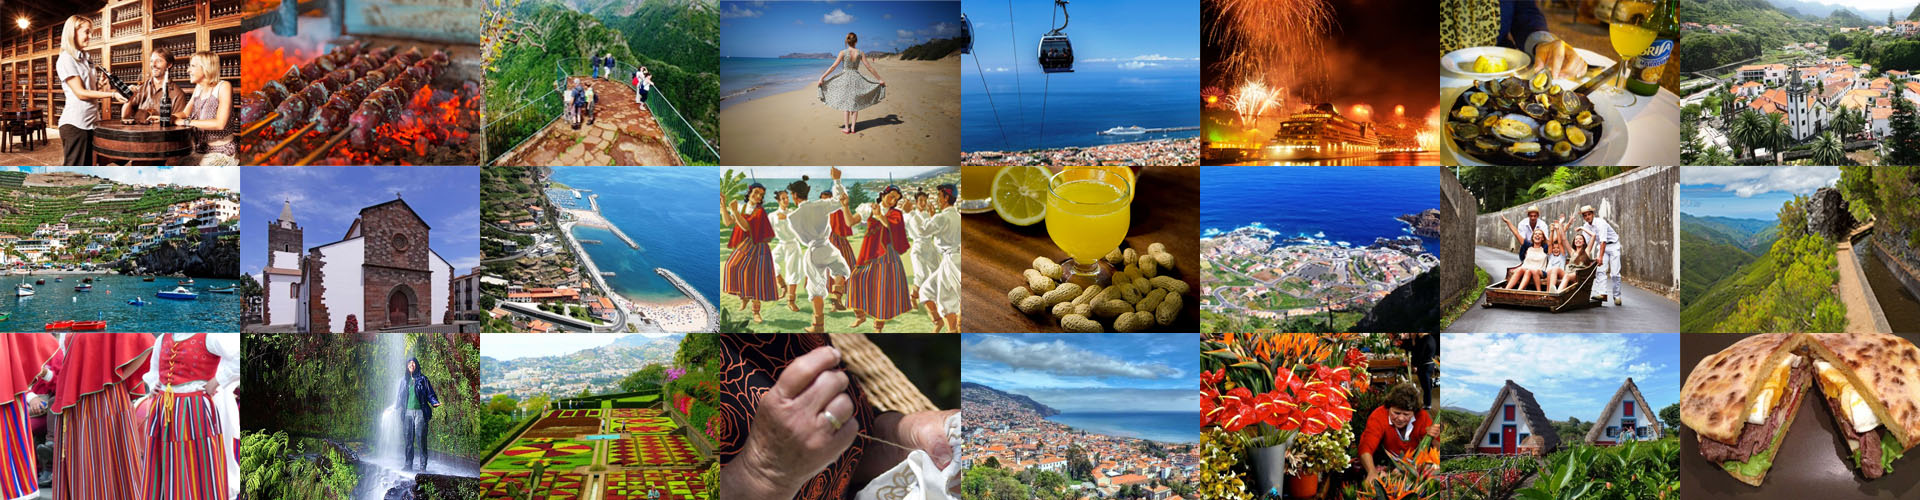 Madeira-Things-to-Do-and-See